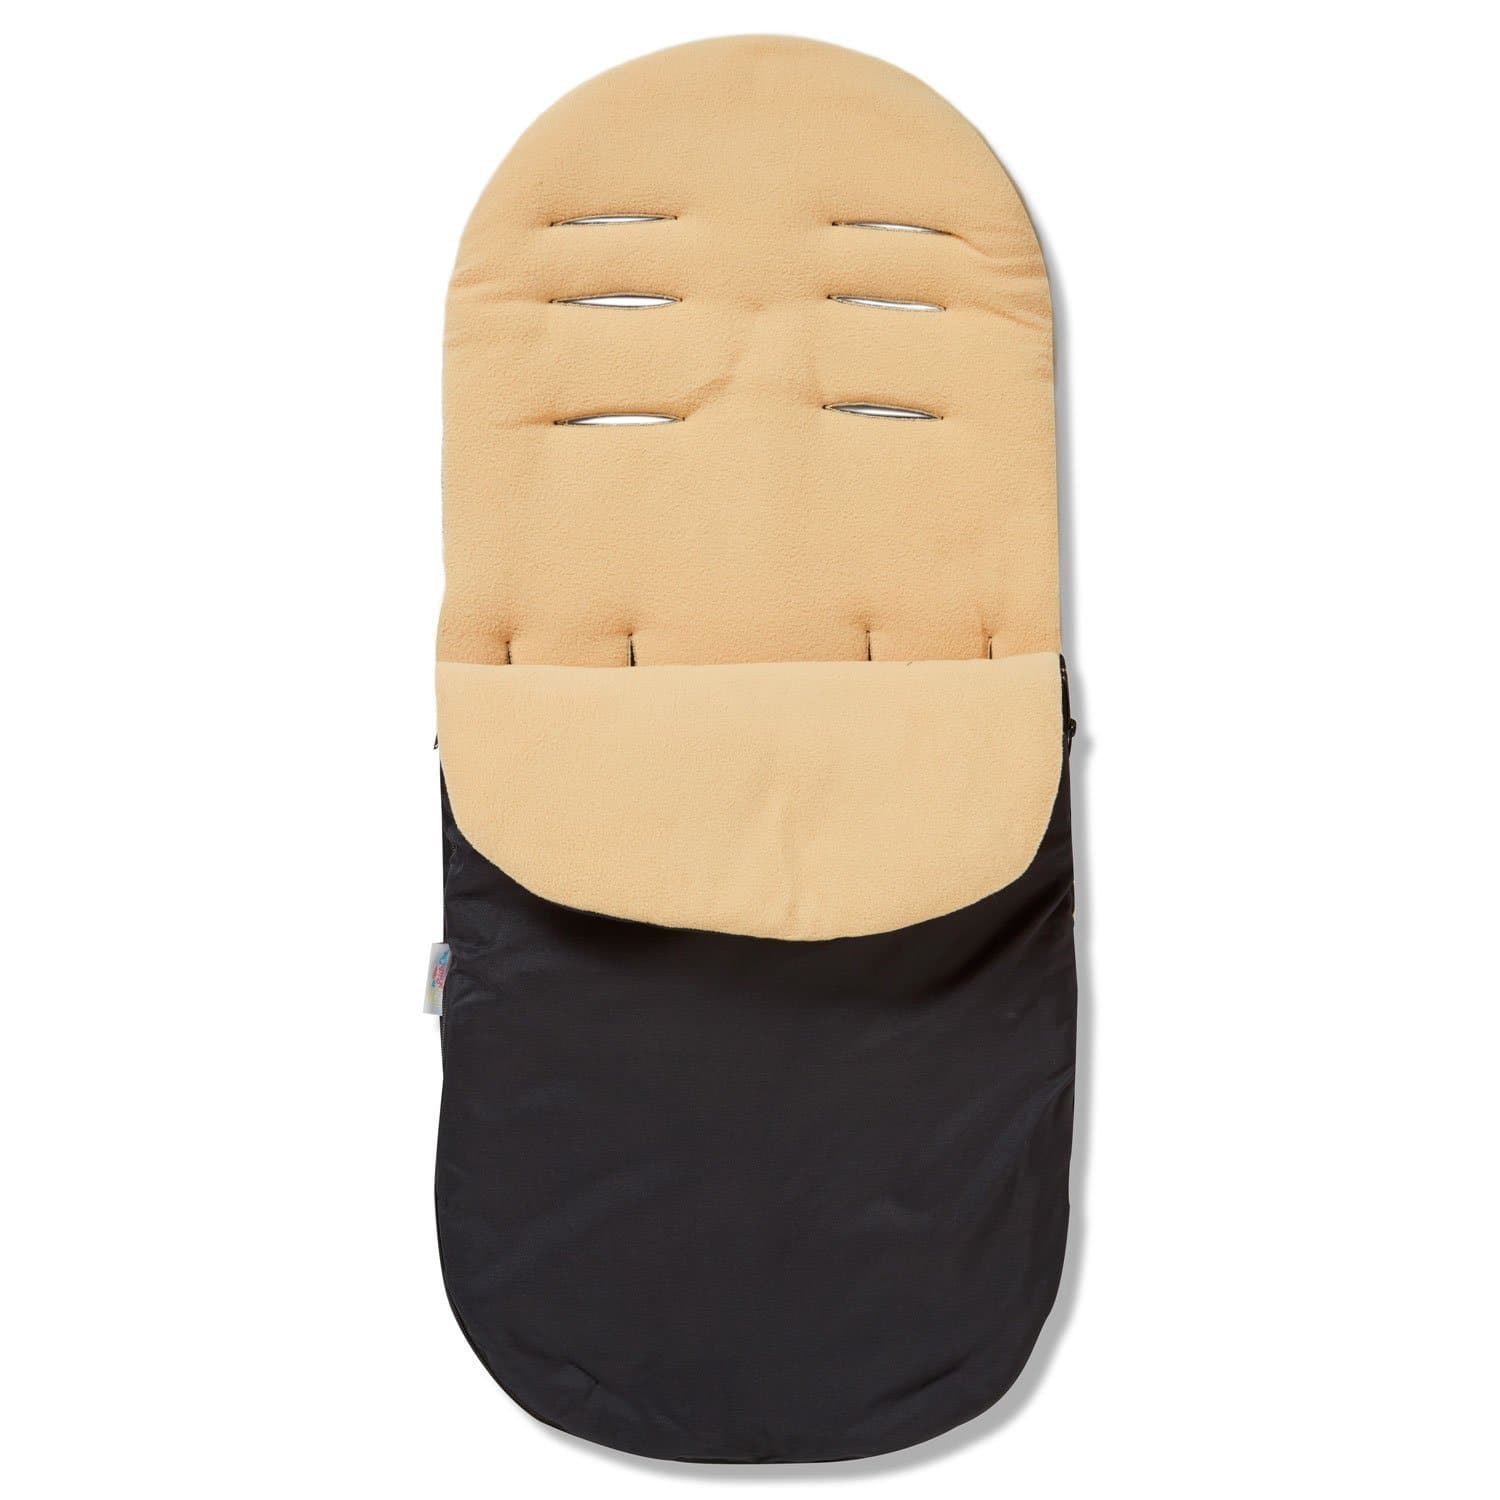 Footmuff / Cosy Toes Compatible with Firstwheels - Sand / Fits All Models | For Your Little One